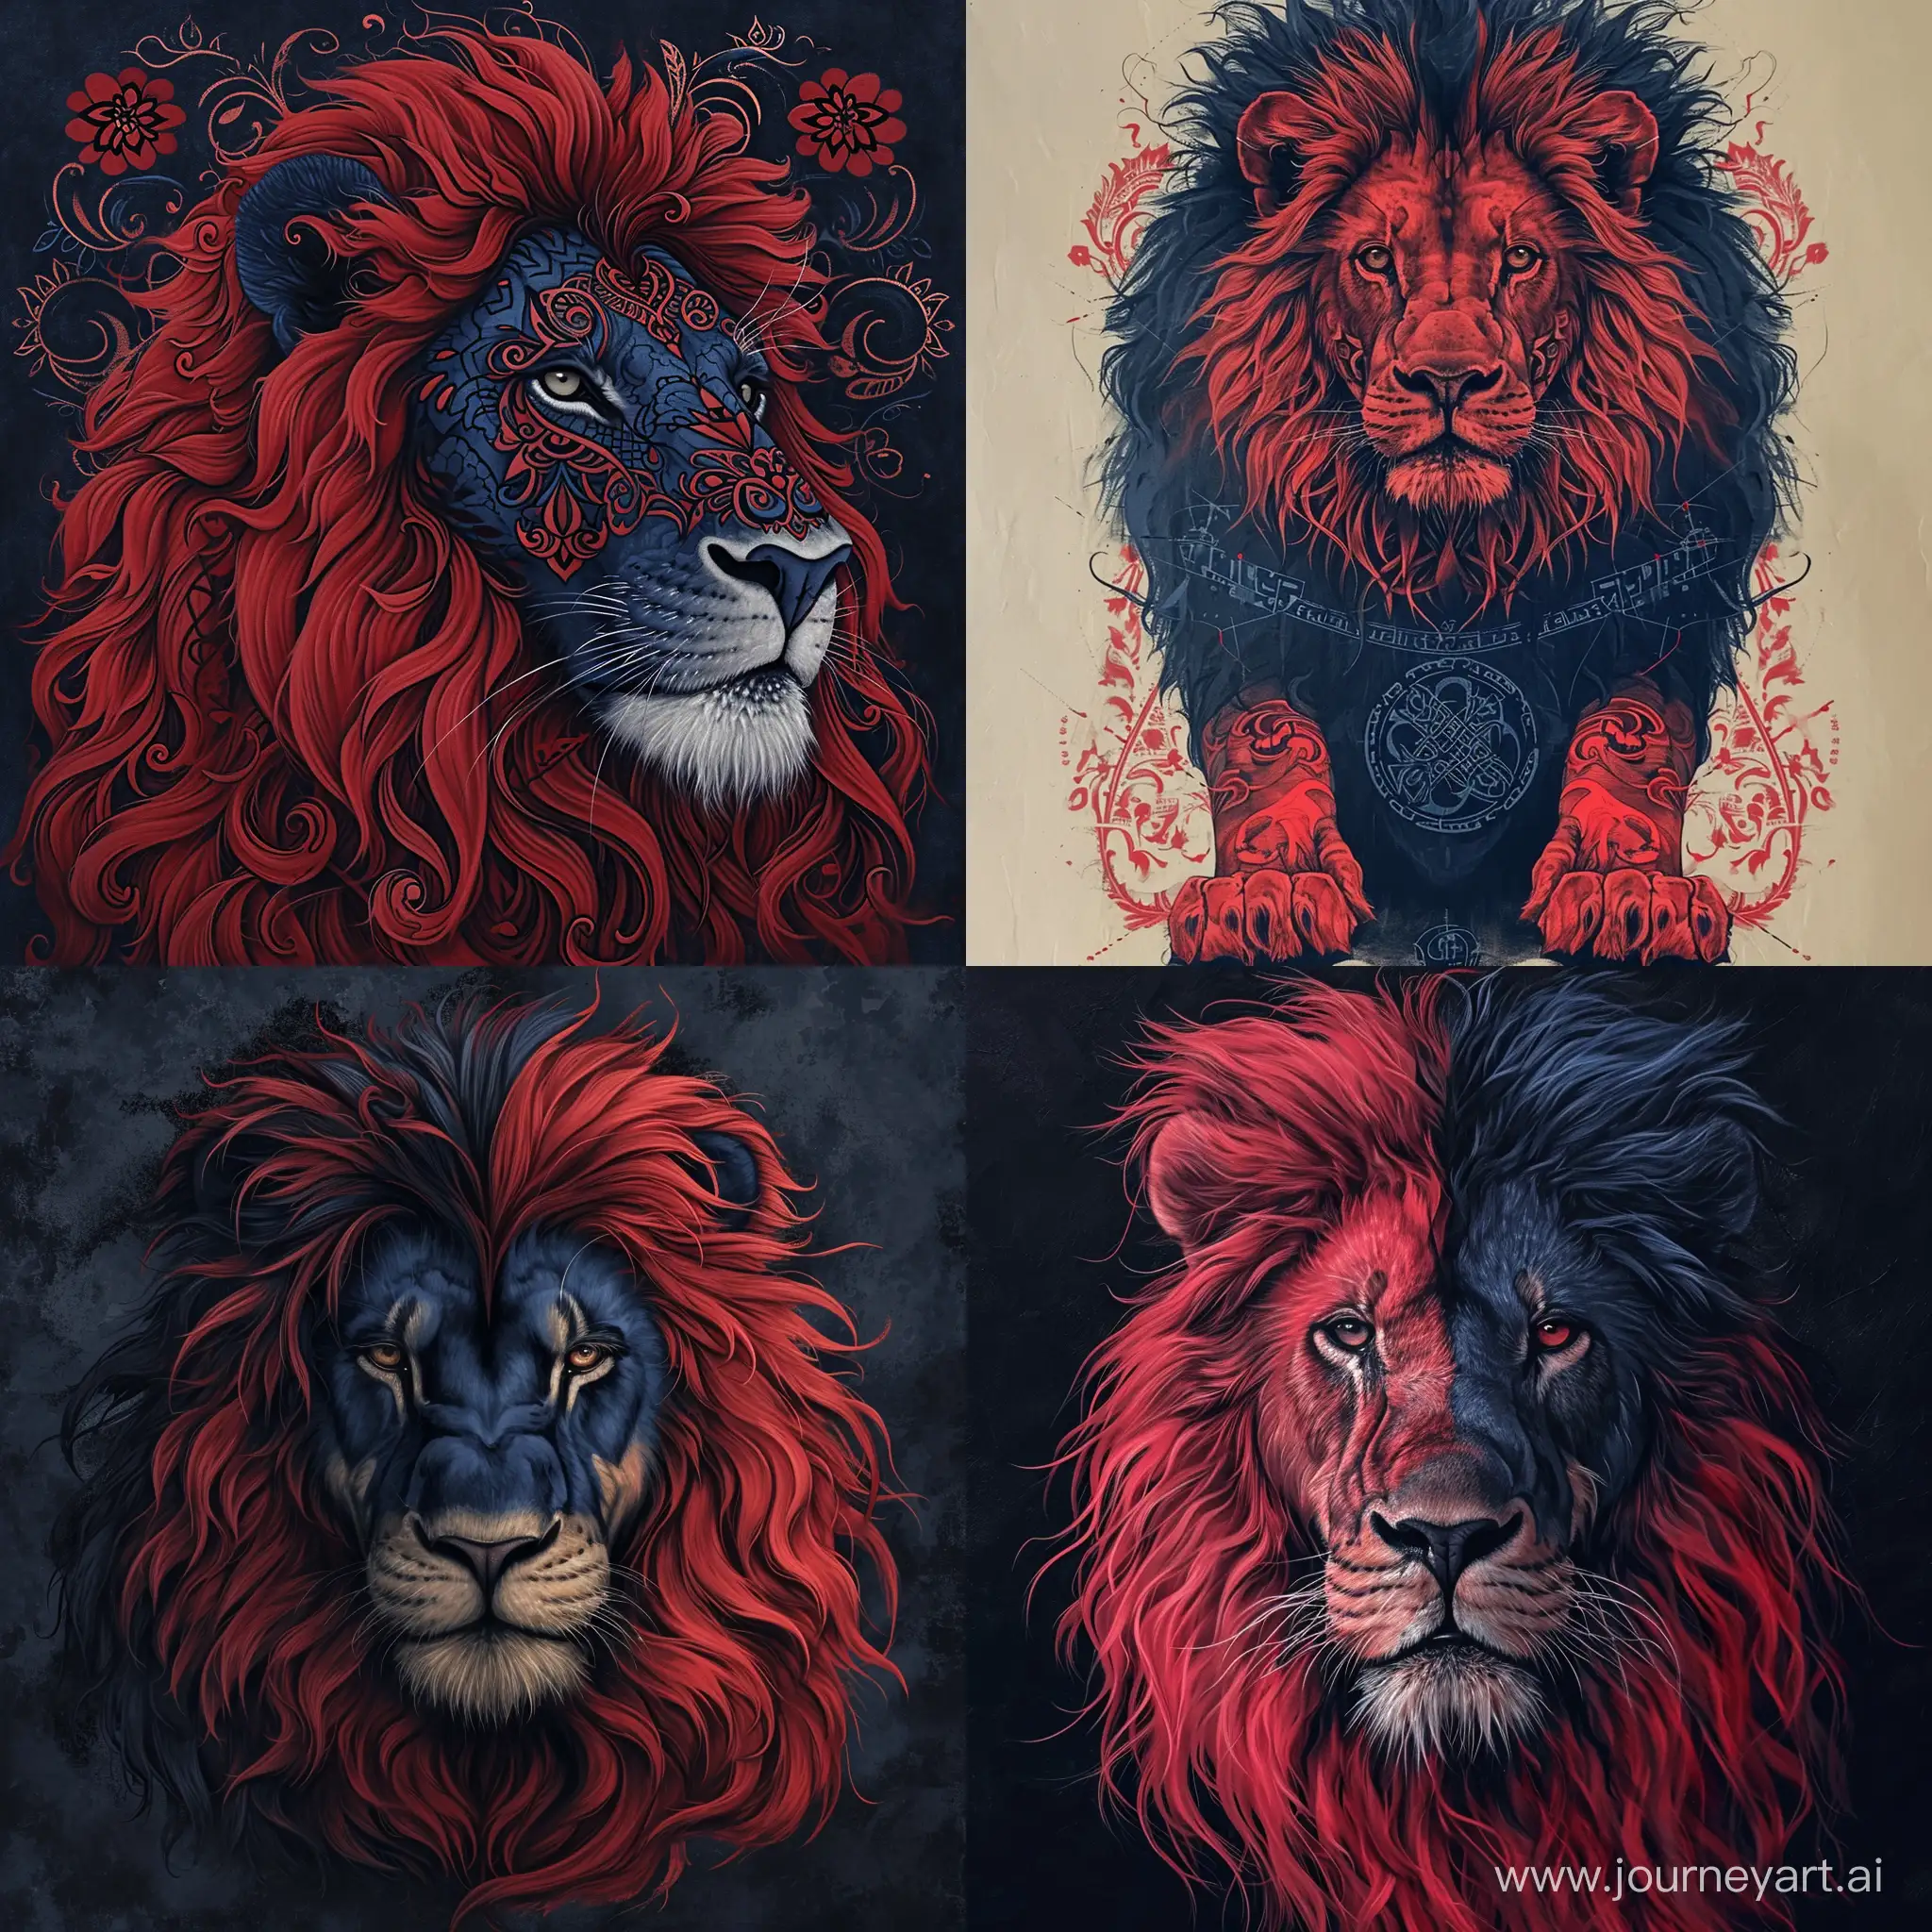 Moroccan-Lion-Tattoo-Drawing-Inspired-by-Matthias-Jung-and-Kerem-Beyit